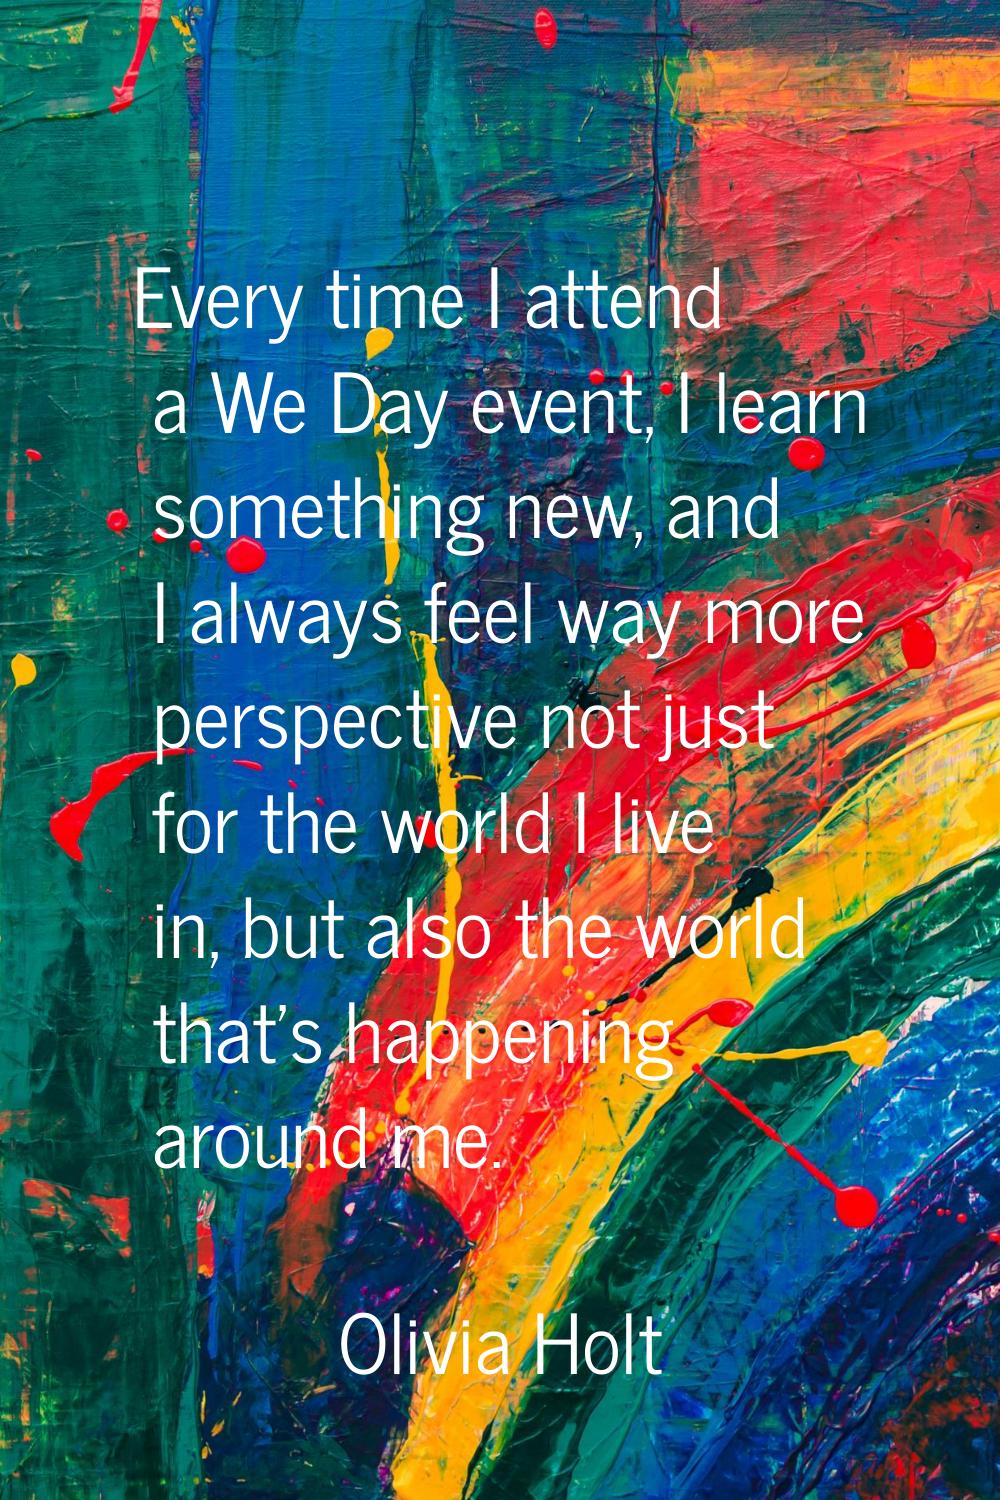 Every time I attend a We Day event, I learn something new, and I always feel way more perspective n